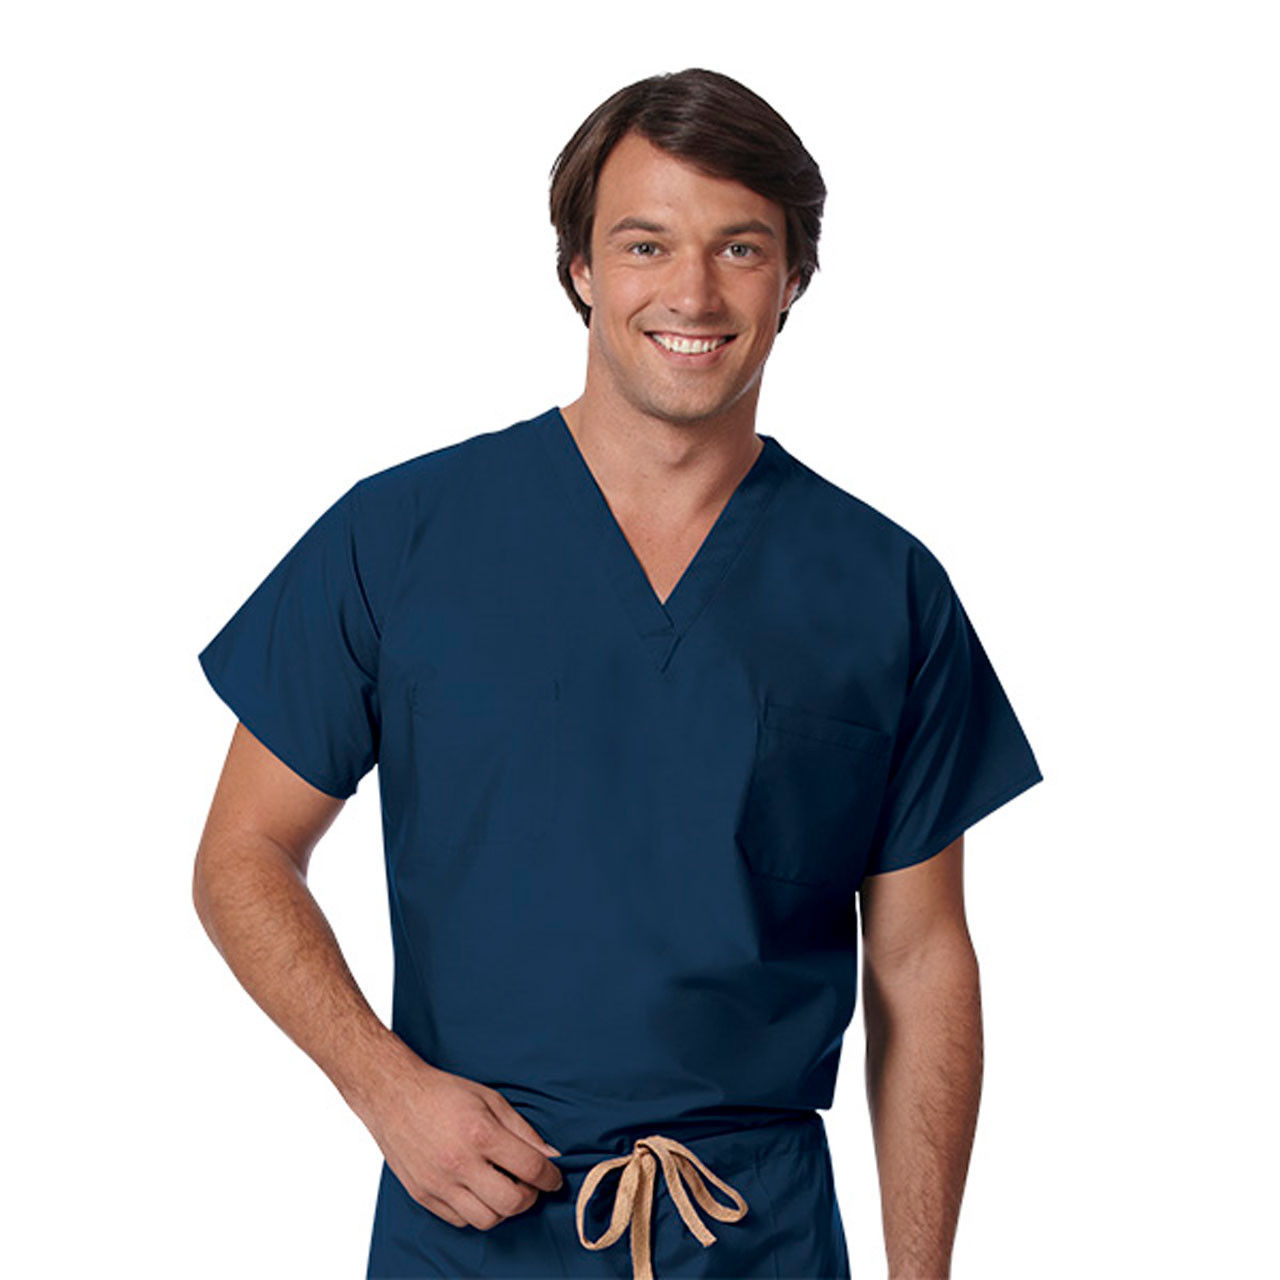 Does the navy surgical scrubs top come with a pocket?